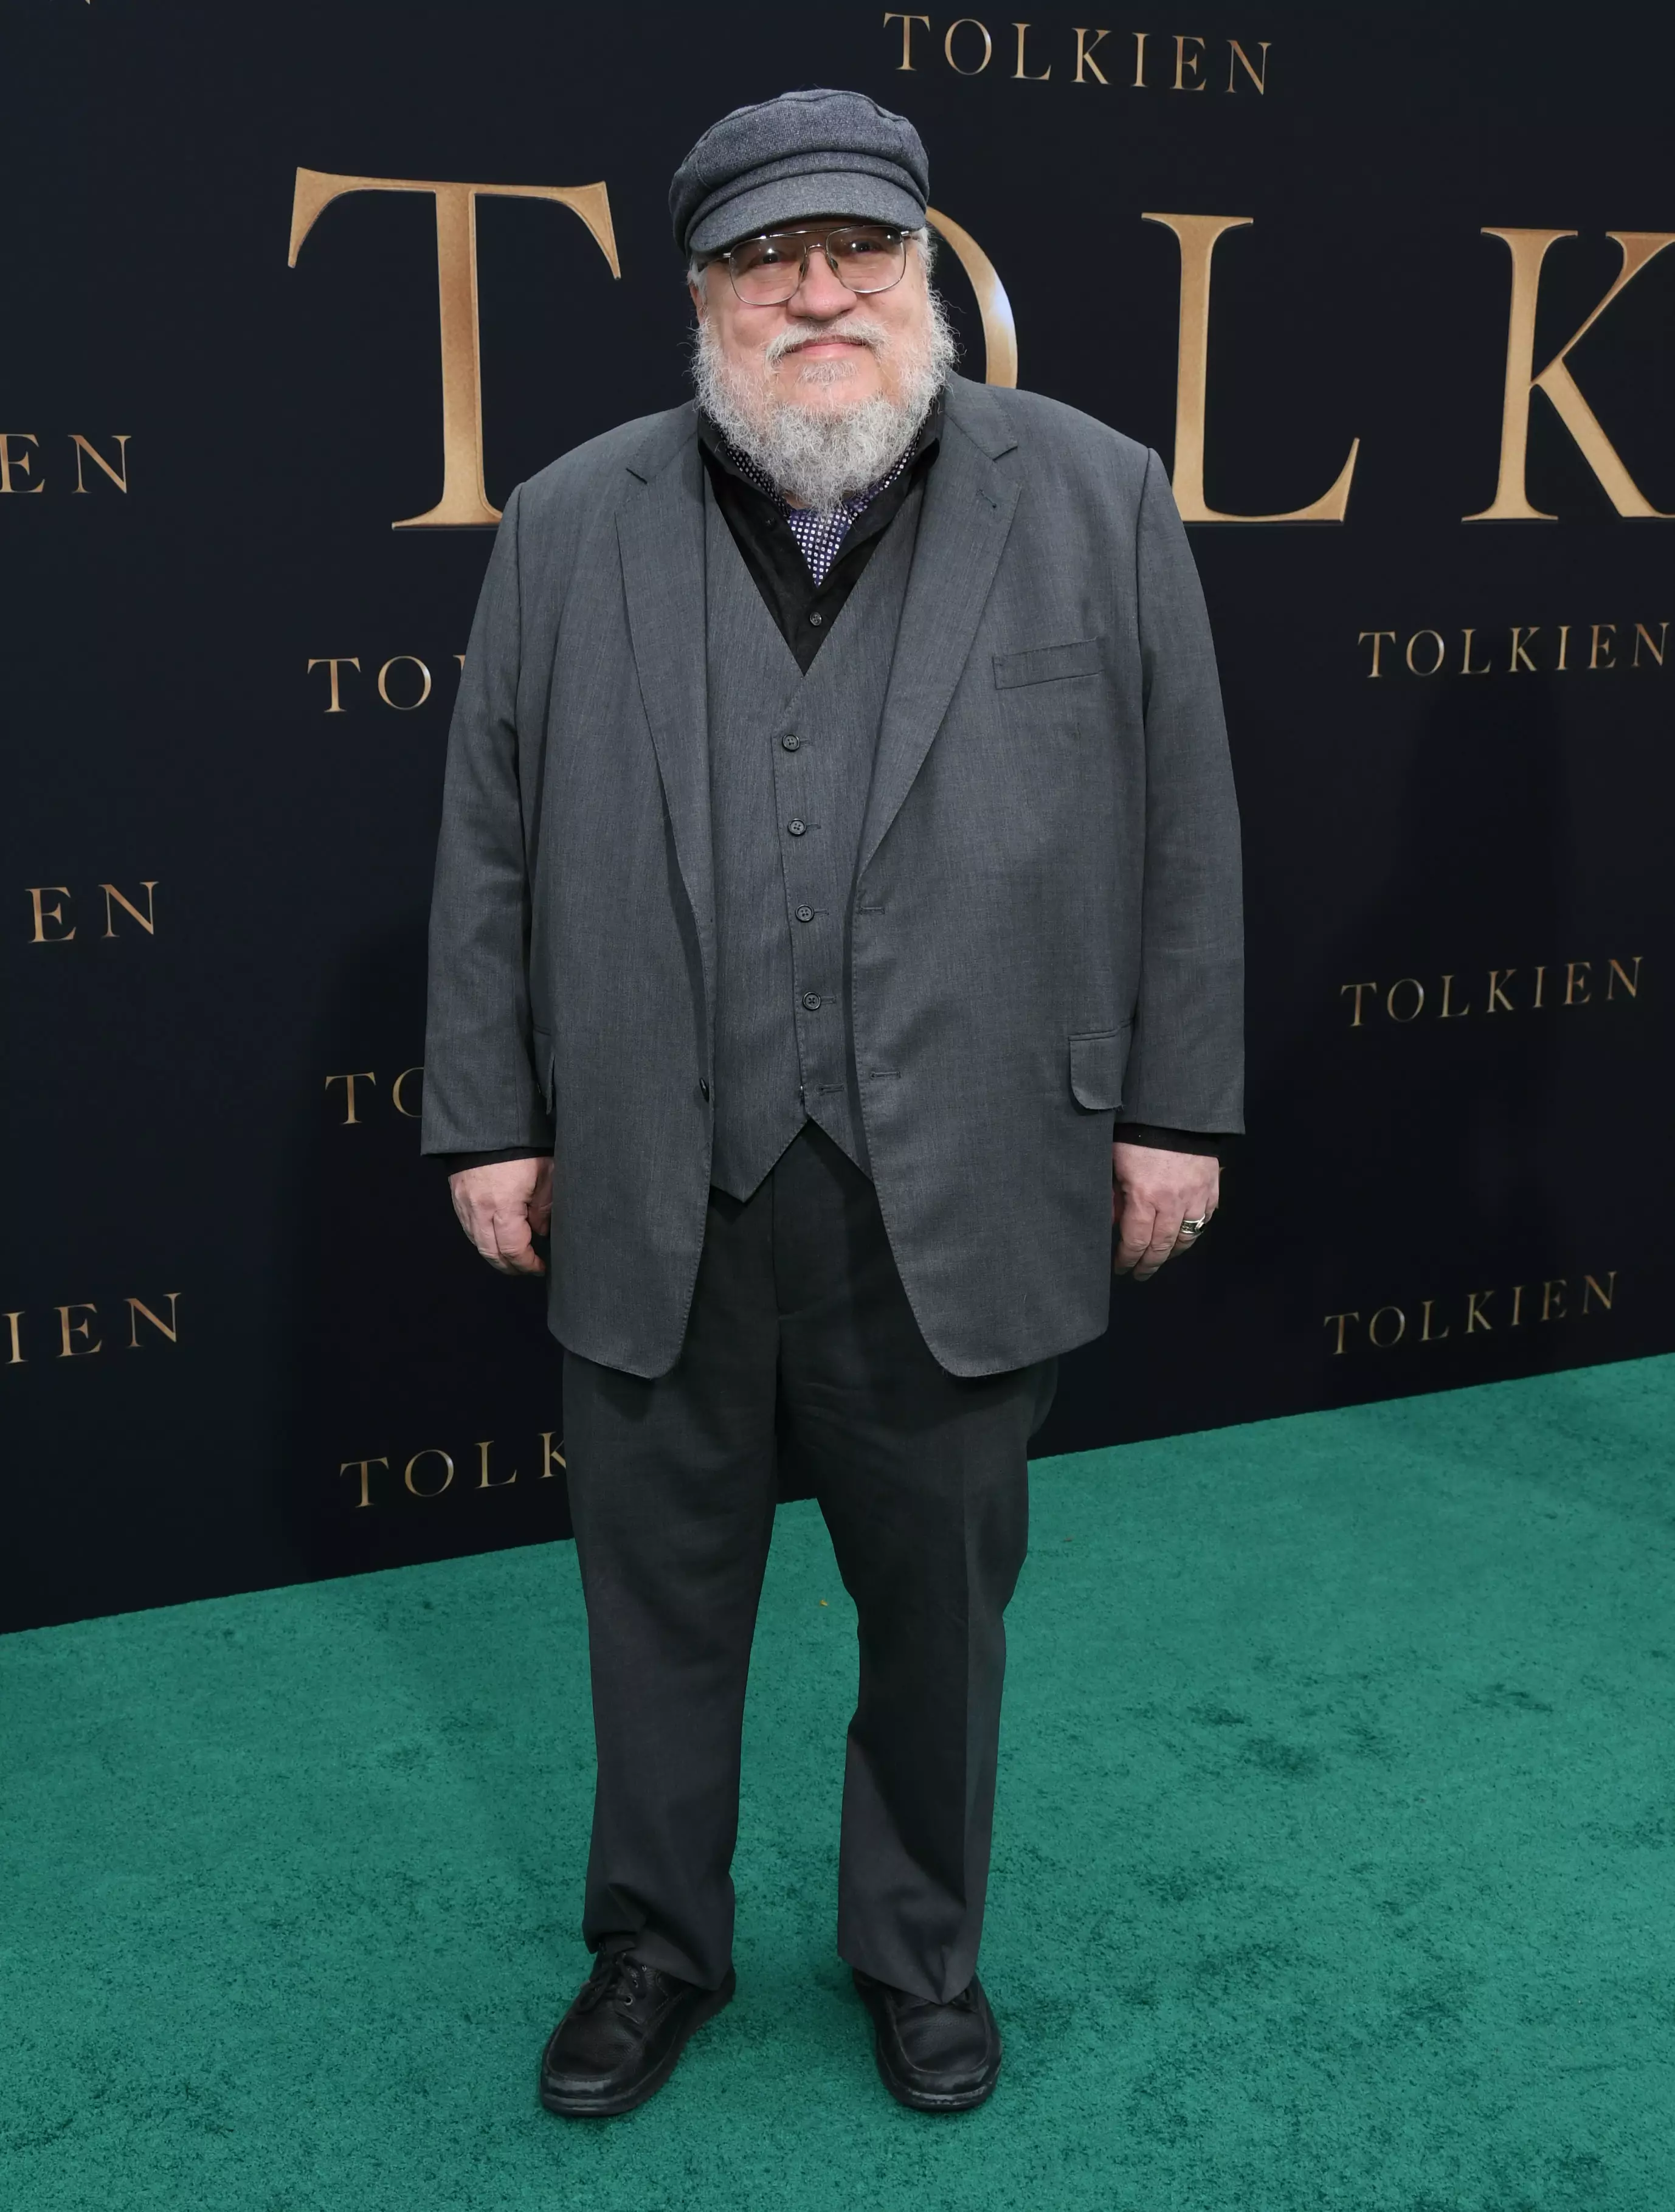 But fans needn't be too sad, George R.R. Martin is working on more projects.